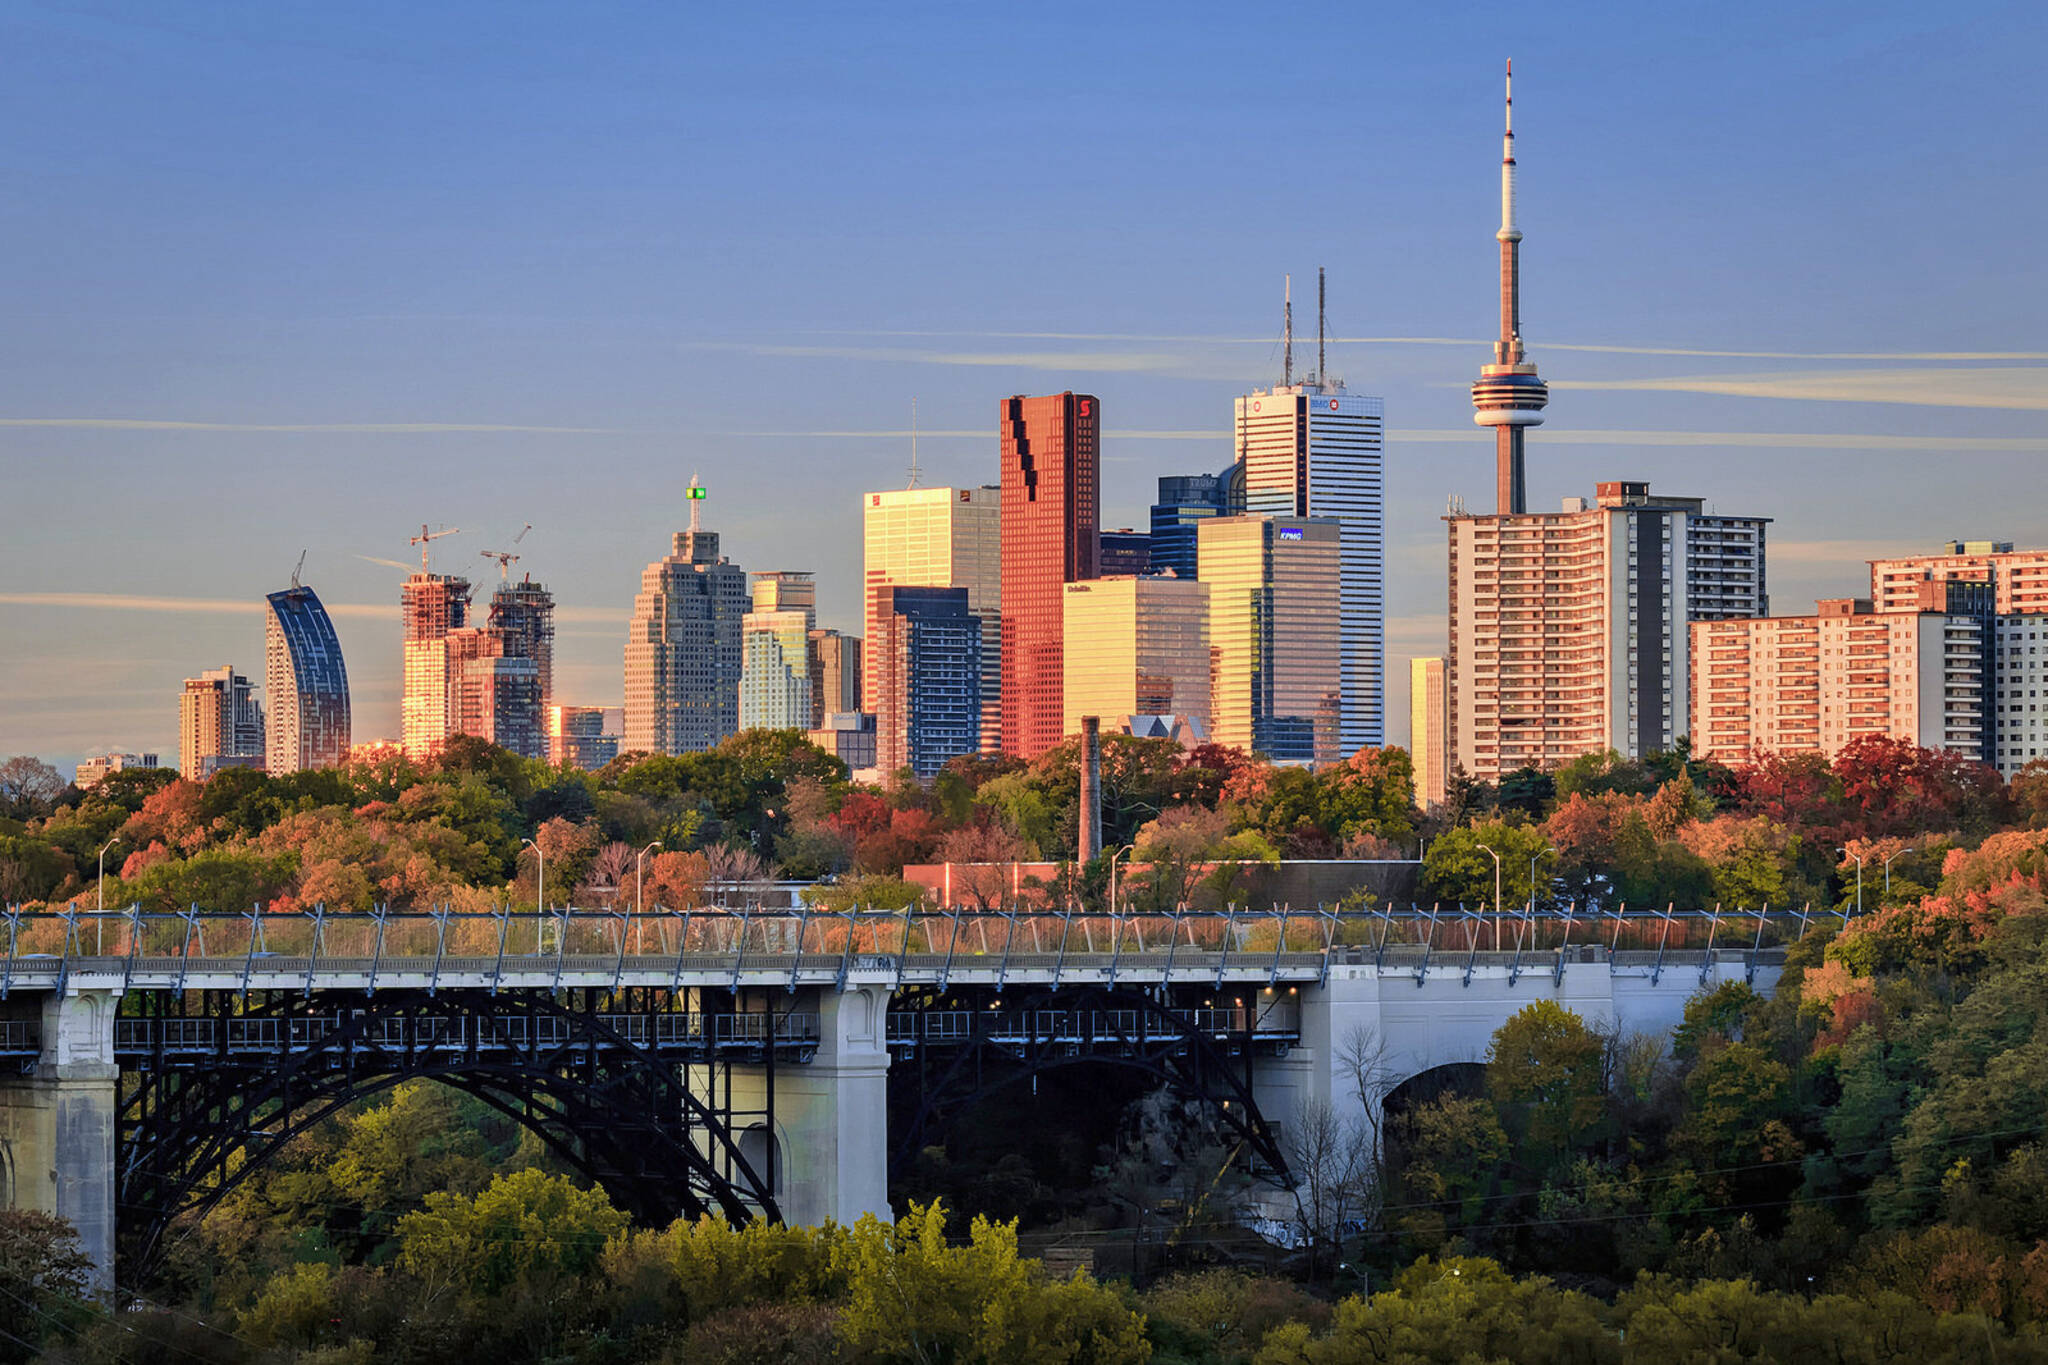 Toronto can expect fantastic weather for much of fall